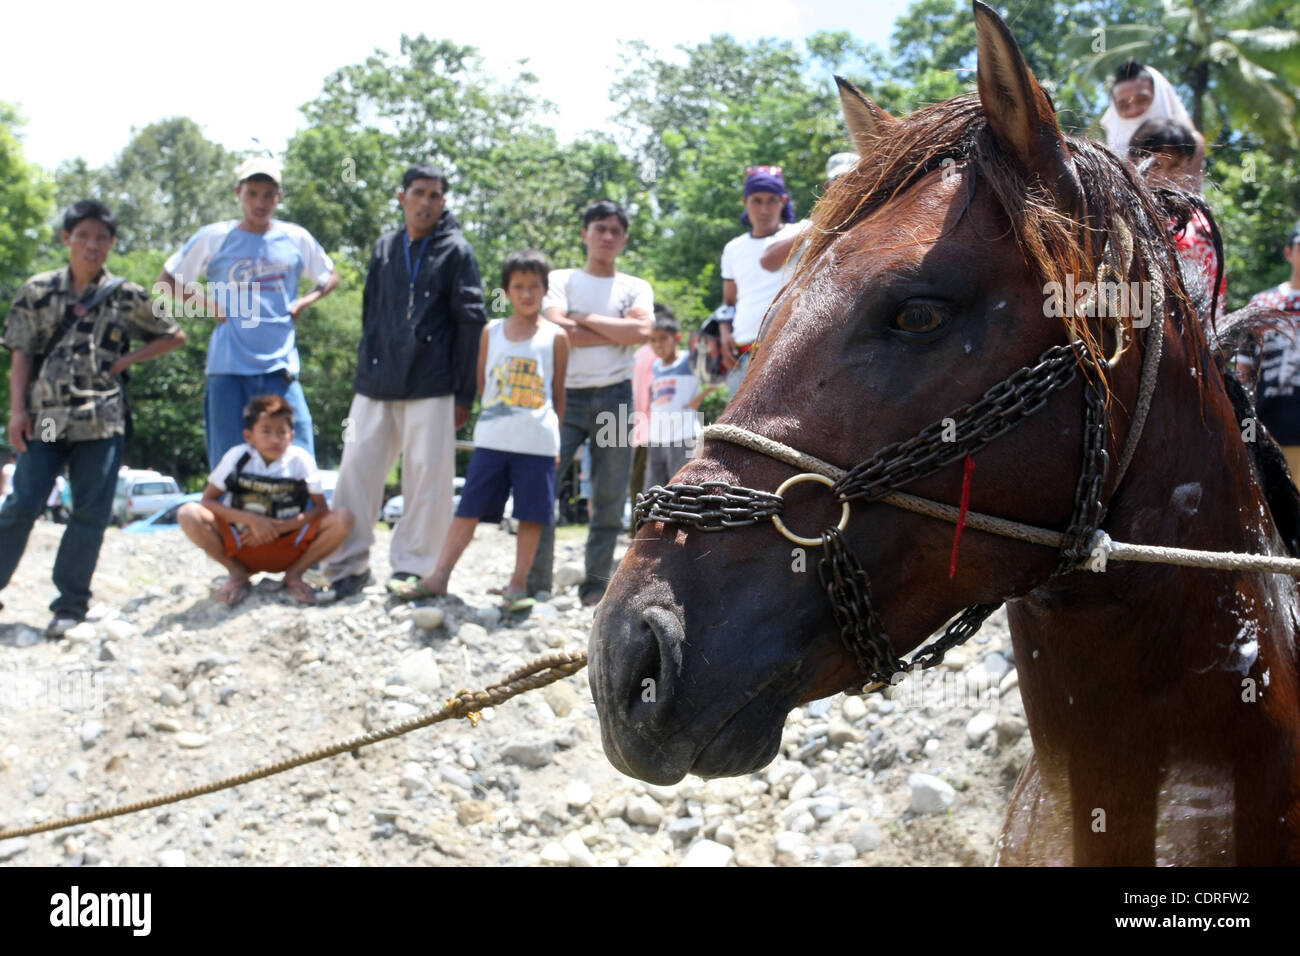 July 14, 2011 - Lake Sebu, Philippines - Locals watch stallion owners bath their horses before engaging in cruel and barbaric horse fighting in Lake Sebu, a small town in the southern Philippines. The event was part of Tnalak Festival of South Cotabato province. Stallions were forced to fight to the Stock Photo